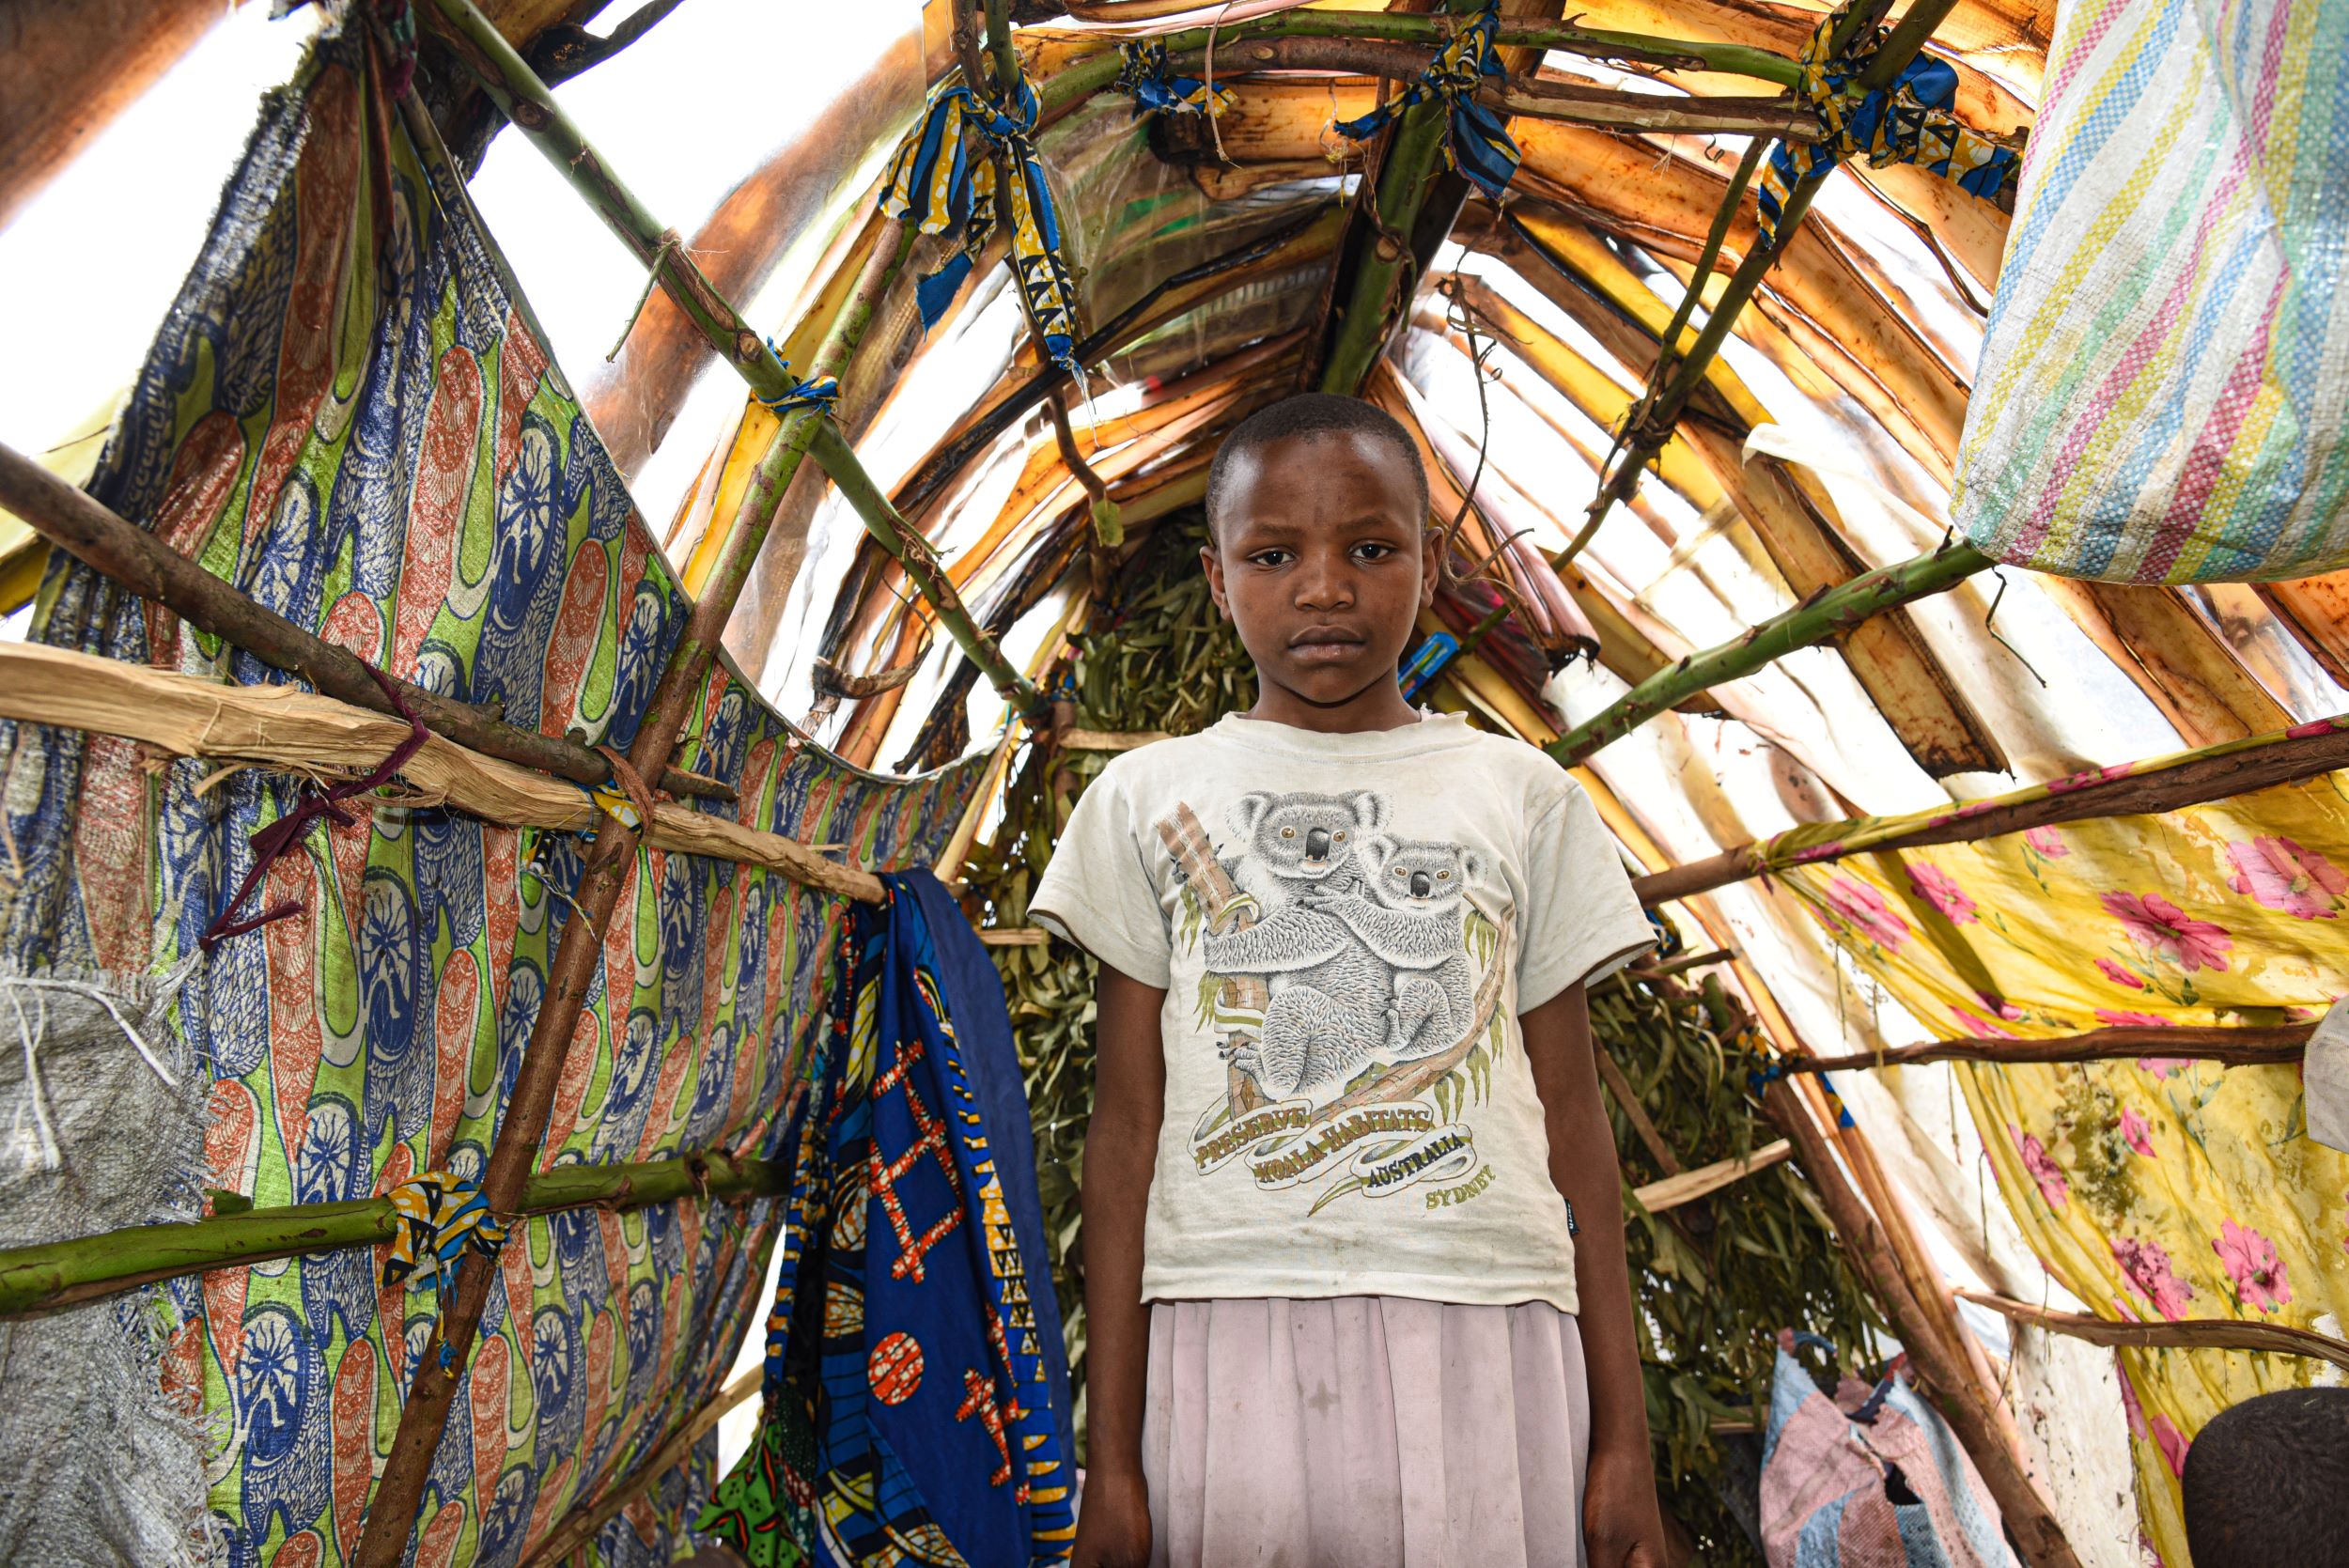 Ten-year-old Congolese girl in the makeshift shelter she shares with her family